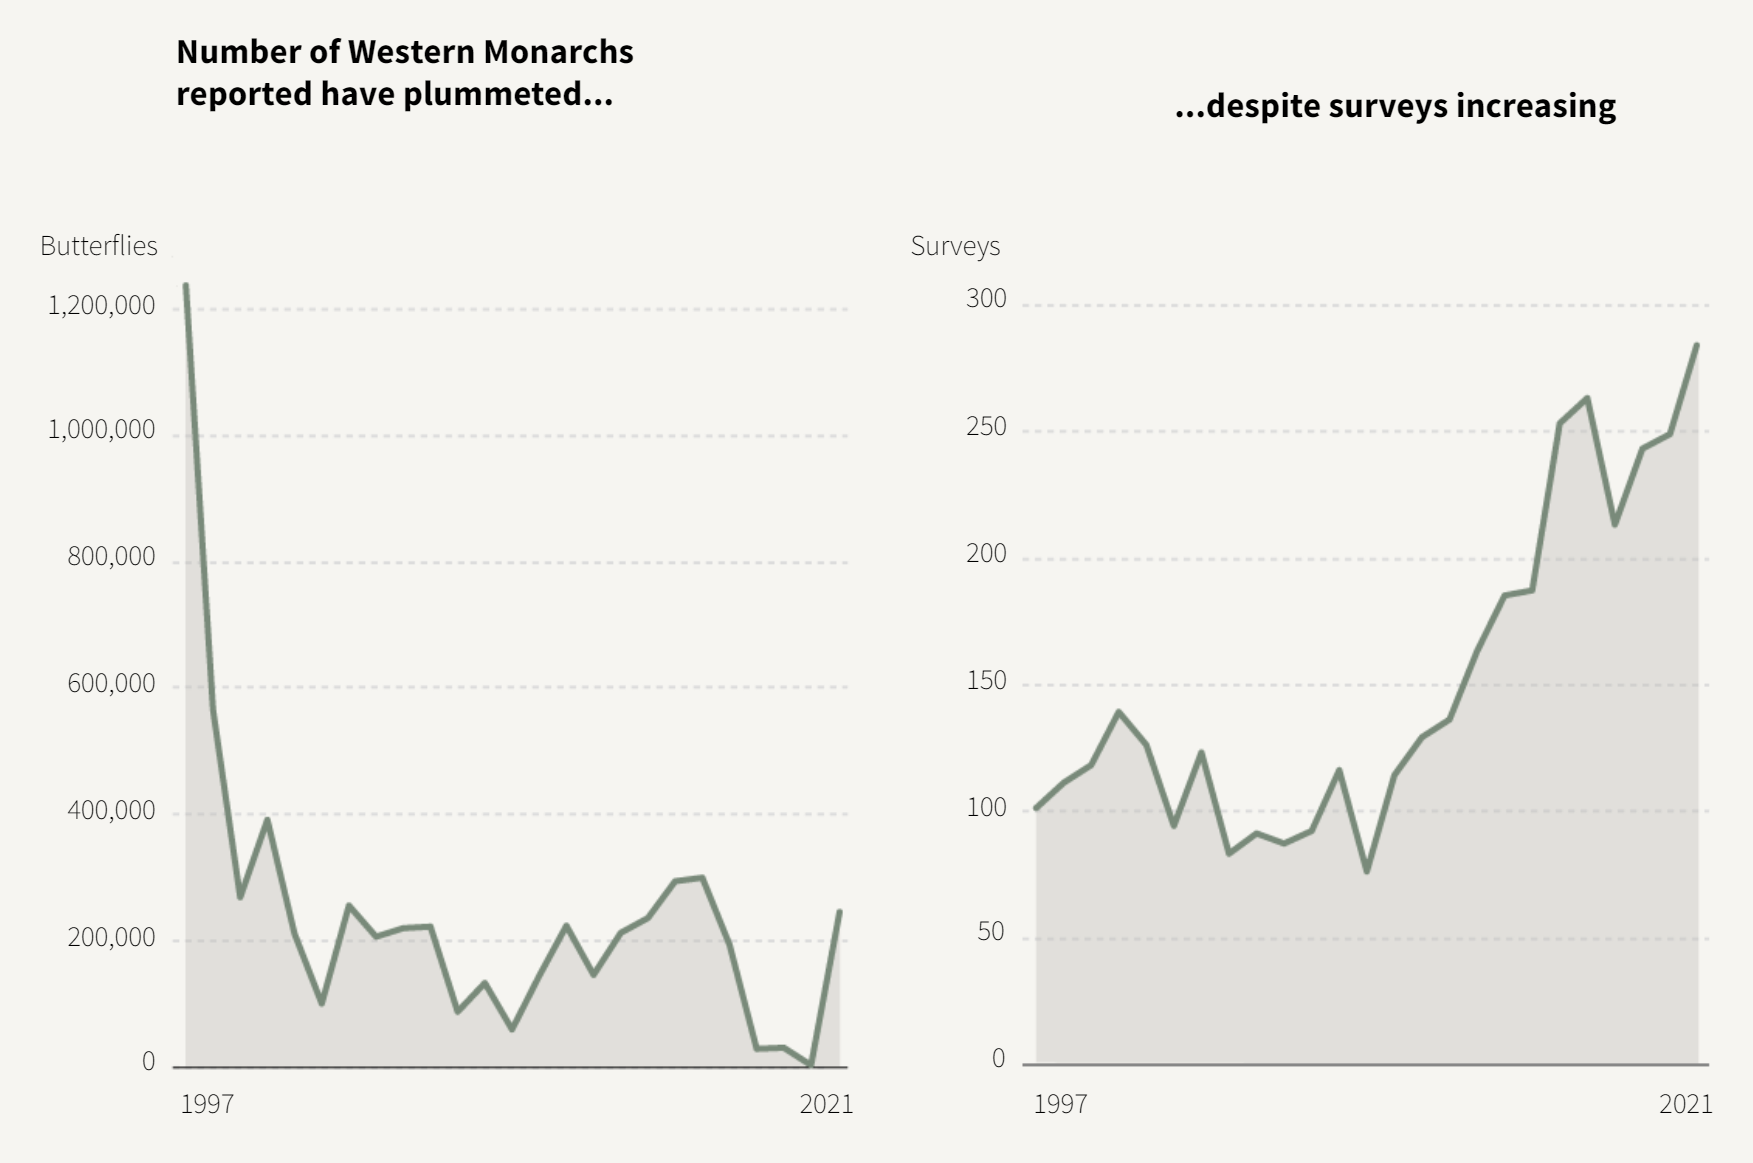 Number of Western Monarch butterflies (left) and butterfly surveys (right), 1997-2021. In the western United States, the number of individual butterflies has been steadily decreasing over the past four decades, at a rate of around 1.6% every year, according to a March 2021 study in the journal Science. The iconic Monarch butterfly is one of the species in trouble. Warmer autumn temperatures, an effect of climate change, may be interfering with the butterflies’ hibernation-like period known as diapause. So rather than slowing down ahead of winter, the insects are staying awake longer, expending more energy, and eventually starving to death. In July 2022, the migratory monarch was added to the IUCN’s global endangered species list. Graphic: Catherine Tai / Reuters